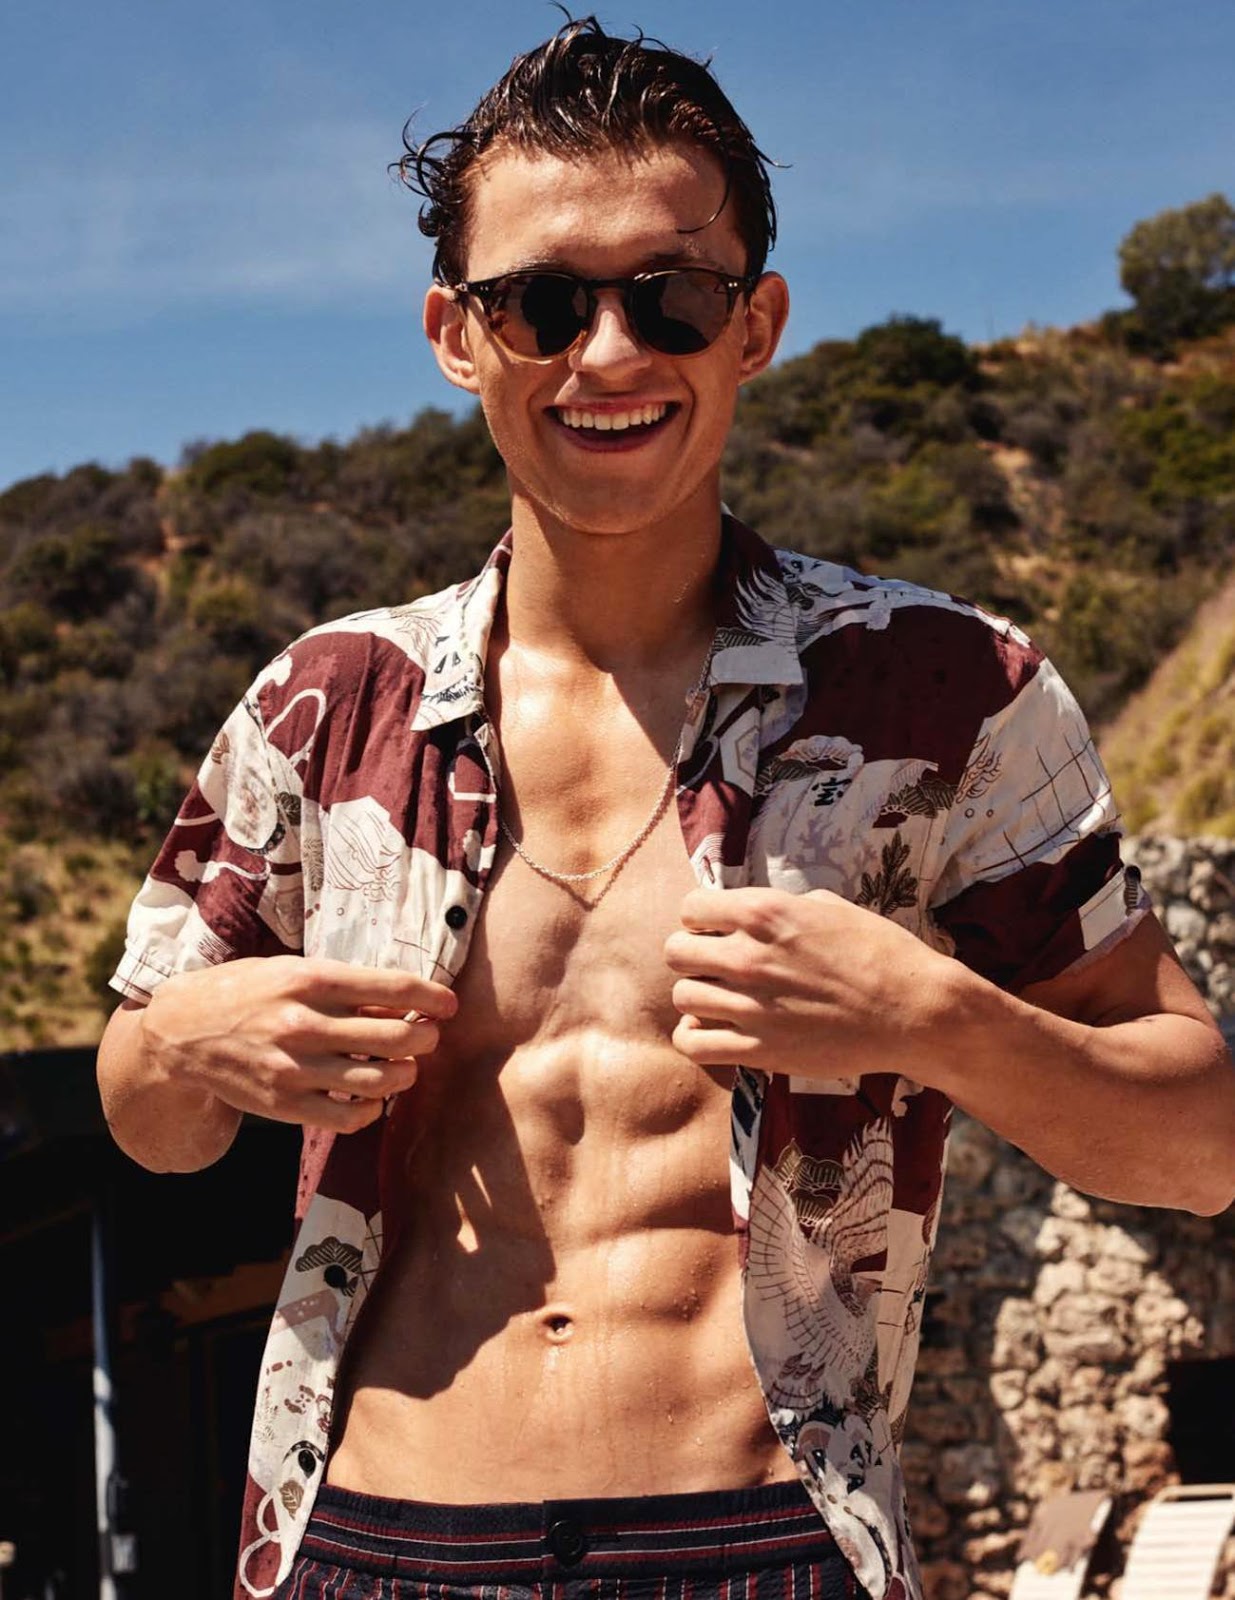 Tom holland shirtless pictures info part 1.